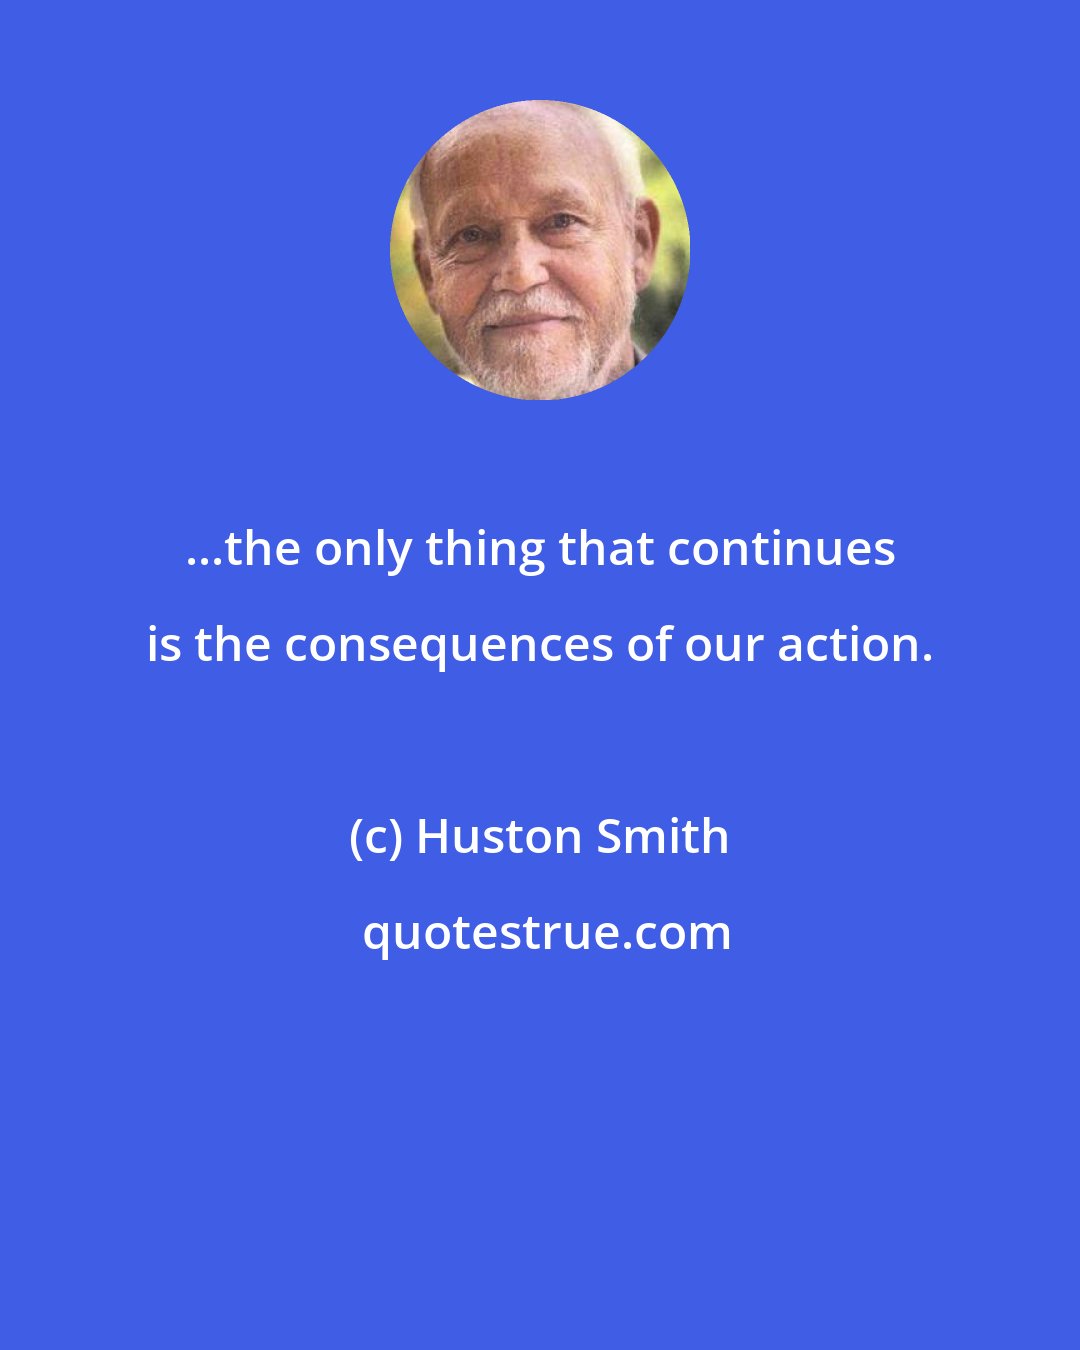 Huston Smith: ...the only thing that continues is the consequences of our action.